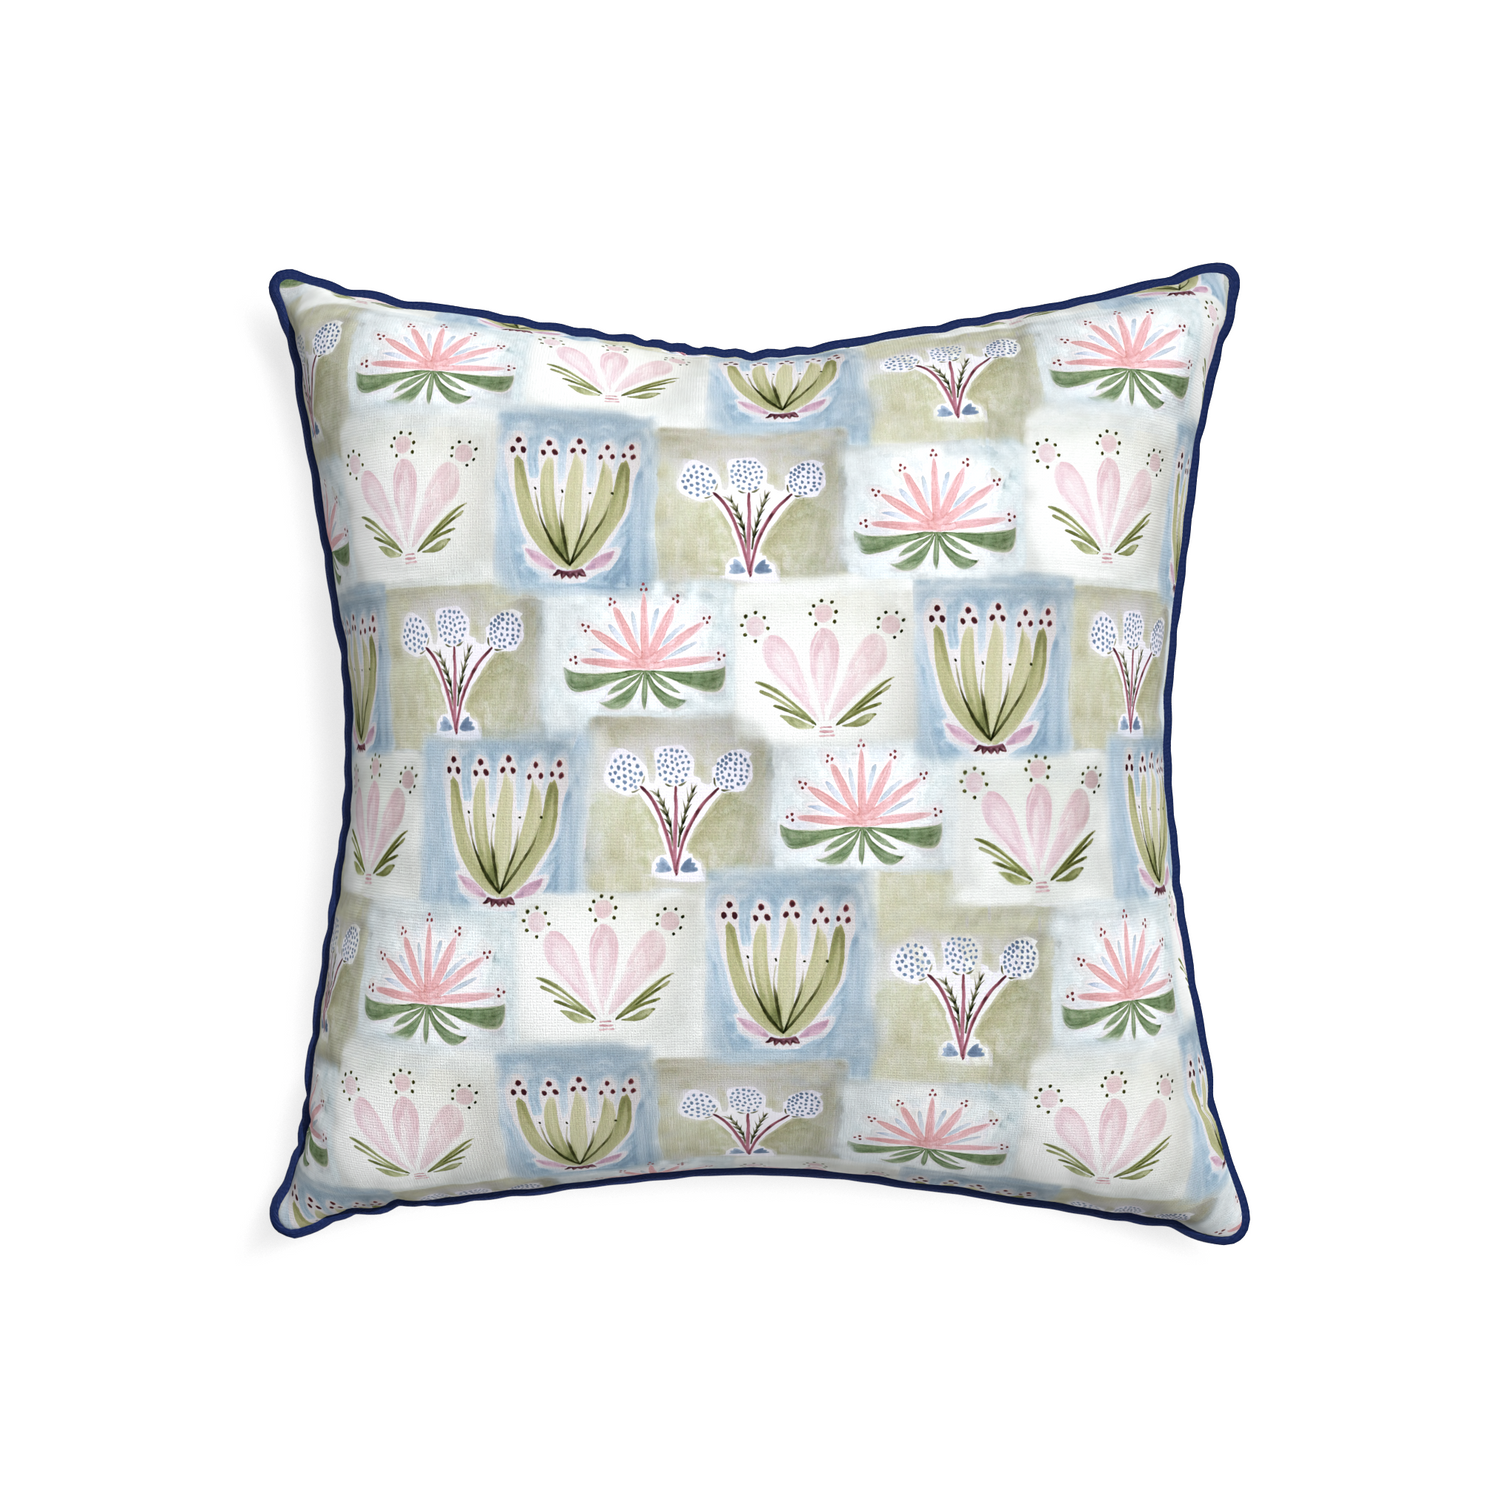 22-square harper custom hand-painted floralpillow with midnight piping on white background